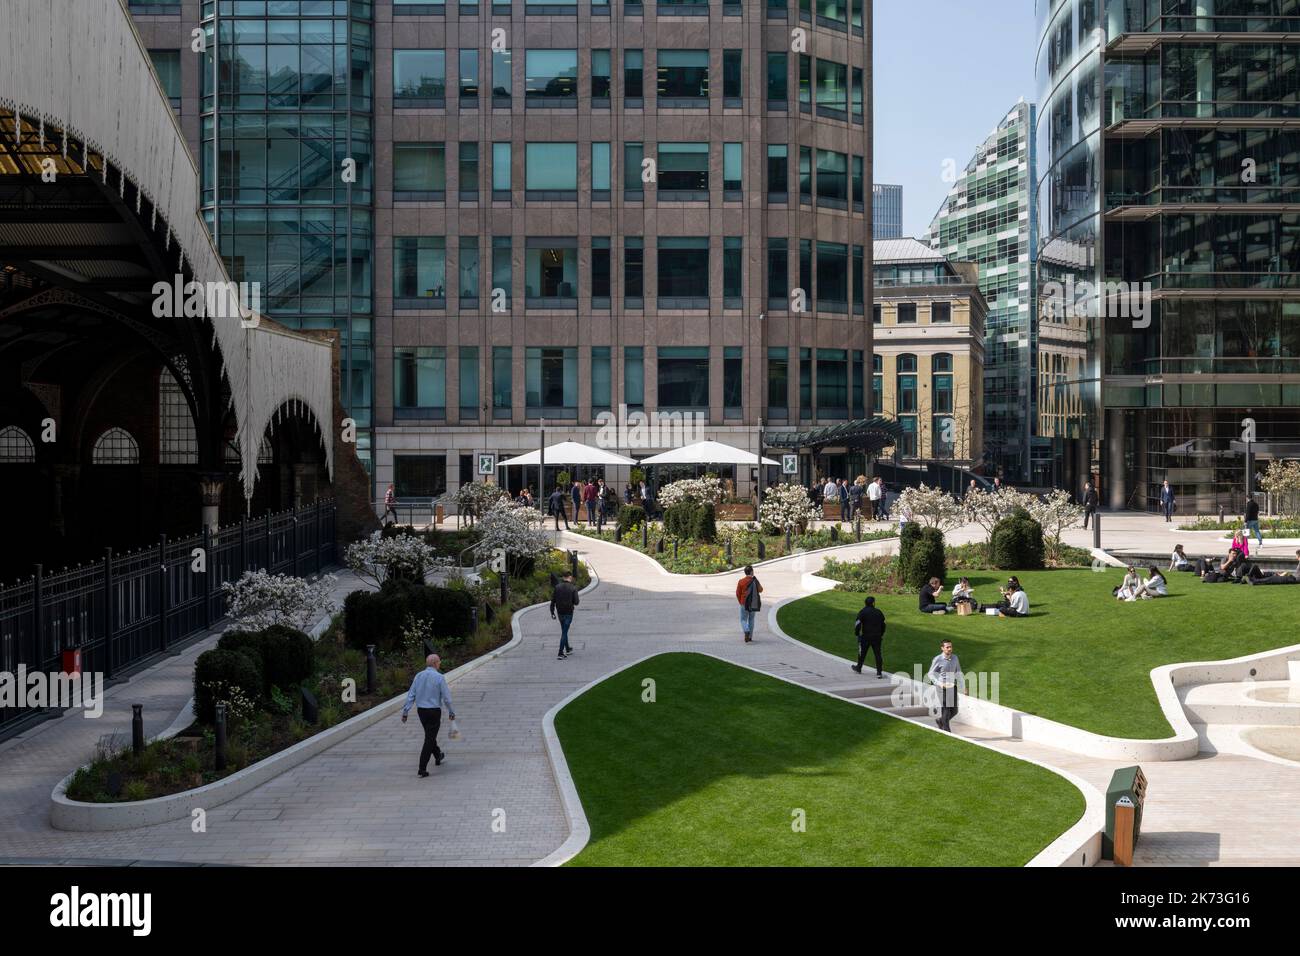 Mid view across square showing paths and green space. Exchange Square, London, United Kingdom. Architect: DSDHA, 2022. Stock Photo